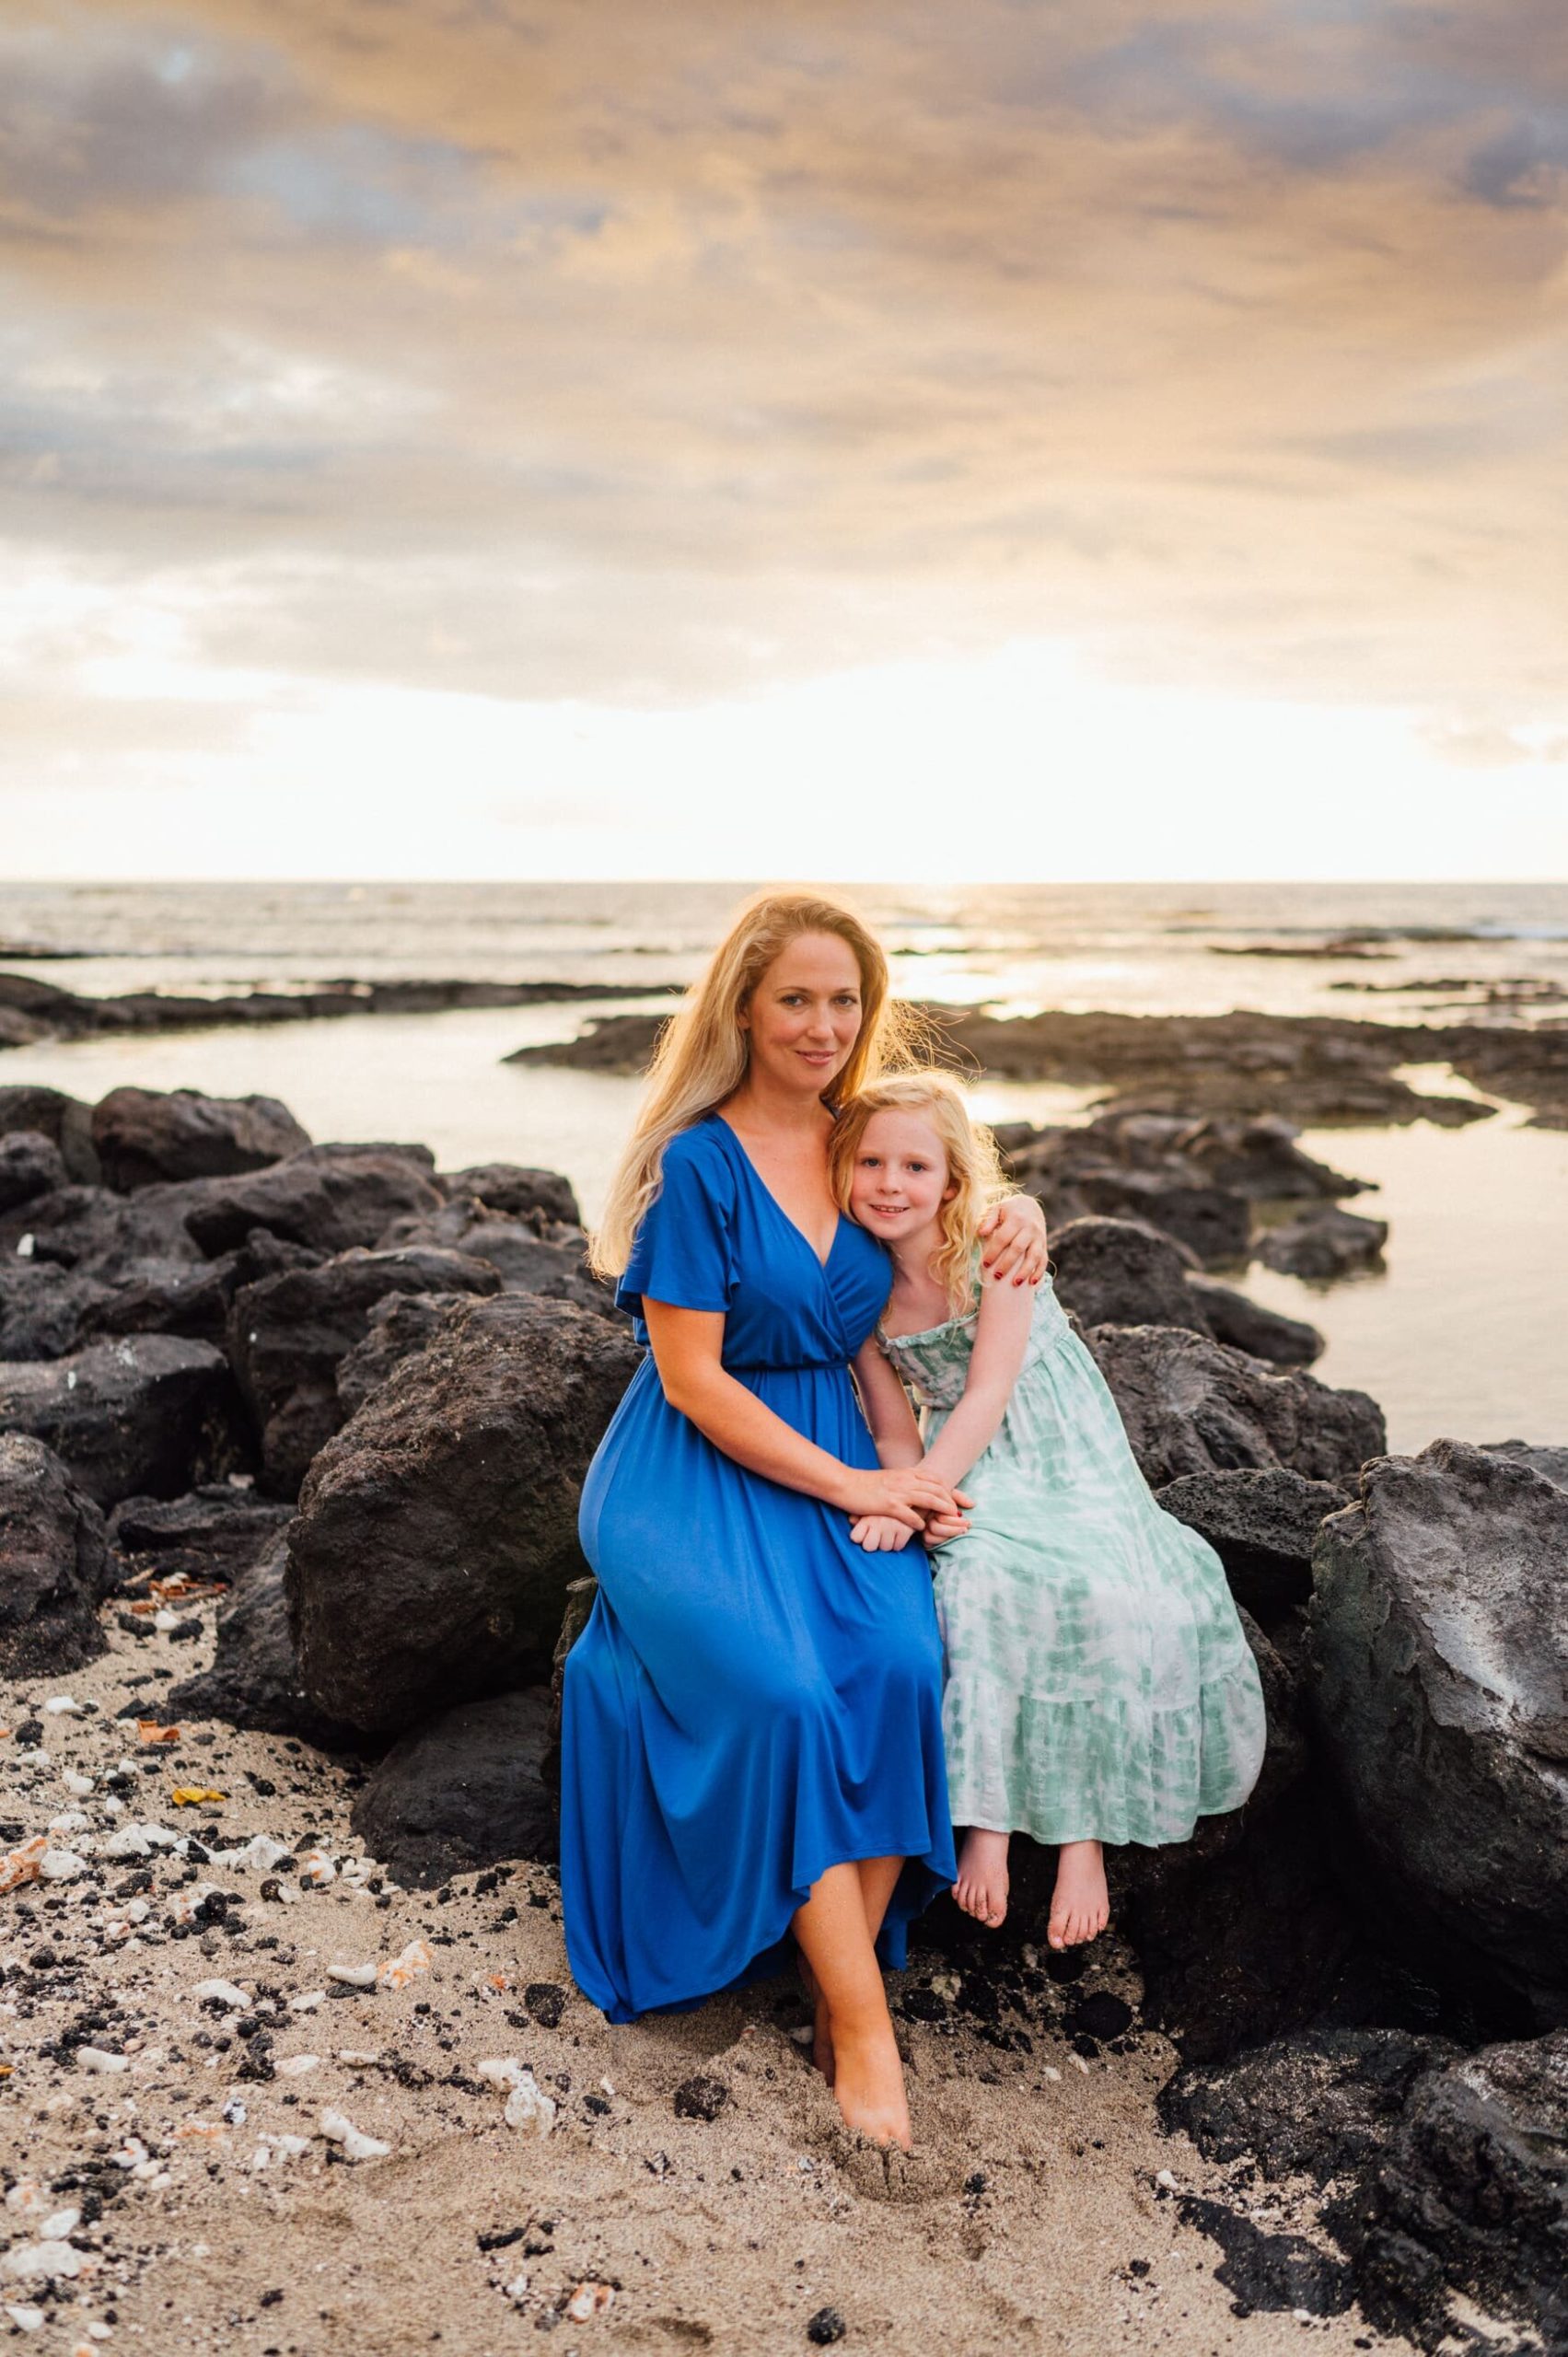 mother-daughter-photo-session-beach-10.jpg